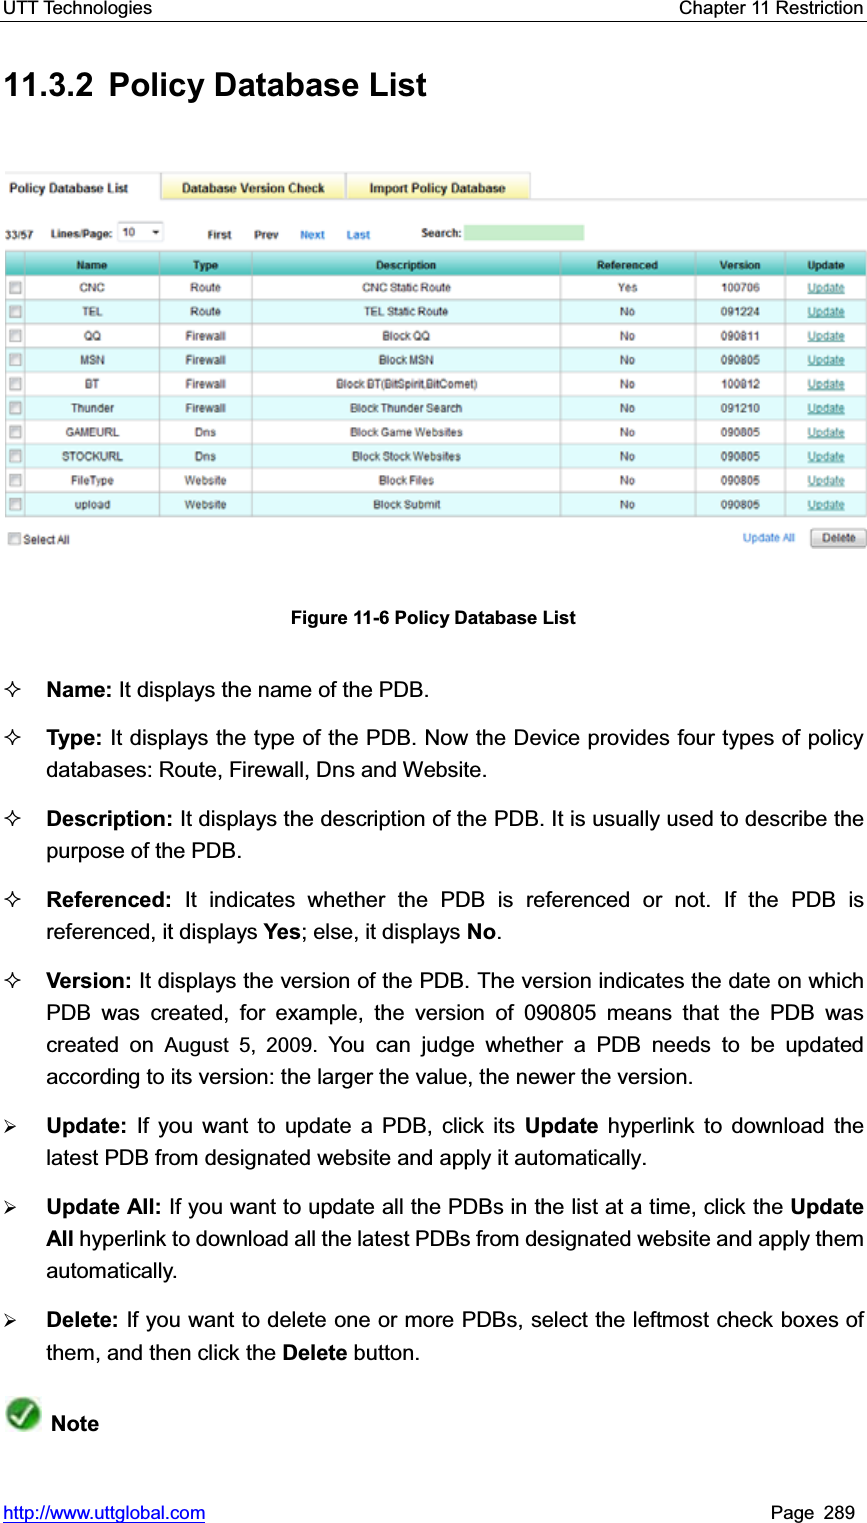 UTT Technologies    Chapter 11 Restriction   http://www.uttglobal.com Page 289 11.3.2 Policy Database List Figure 11-6 Policy Database List Name: It displays the name of the PDB. Type:  It displays the type of the PDB. Now the Device provides four types of policy databases: Route, Firewall, Dns and Website. Description: It displays the description of the PDB. It is usually used to describe the purpose of the PDB. Referenced:  It indicates whether the PDB is referenced or not. If the PDB is referenced, it displays Yes; else, it displays No.Version: It displays the version of the PDB. The version indicates the date on which PDB was created, for example, the version of 090805 means that the PDB was created on August 5, 2009. You can judge whether a PDB needs to be updated according to its version: the larger the value, the newer the version. ¾Update: If you want to update a PDB, click its Update hyperlink to download the latest PDB from designated website and apply it automatically. ¾Update All: If you want to update all the PDBs in the list at a time, click the Update All hyperlink to download all the latest PDBs from designated website and apply them automatically.¾Delete: If you want to delete one or more PDBs, select the leftmost check boxes of them, and then click the Delete button.Note